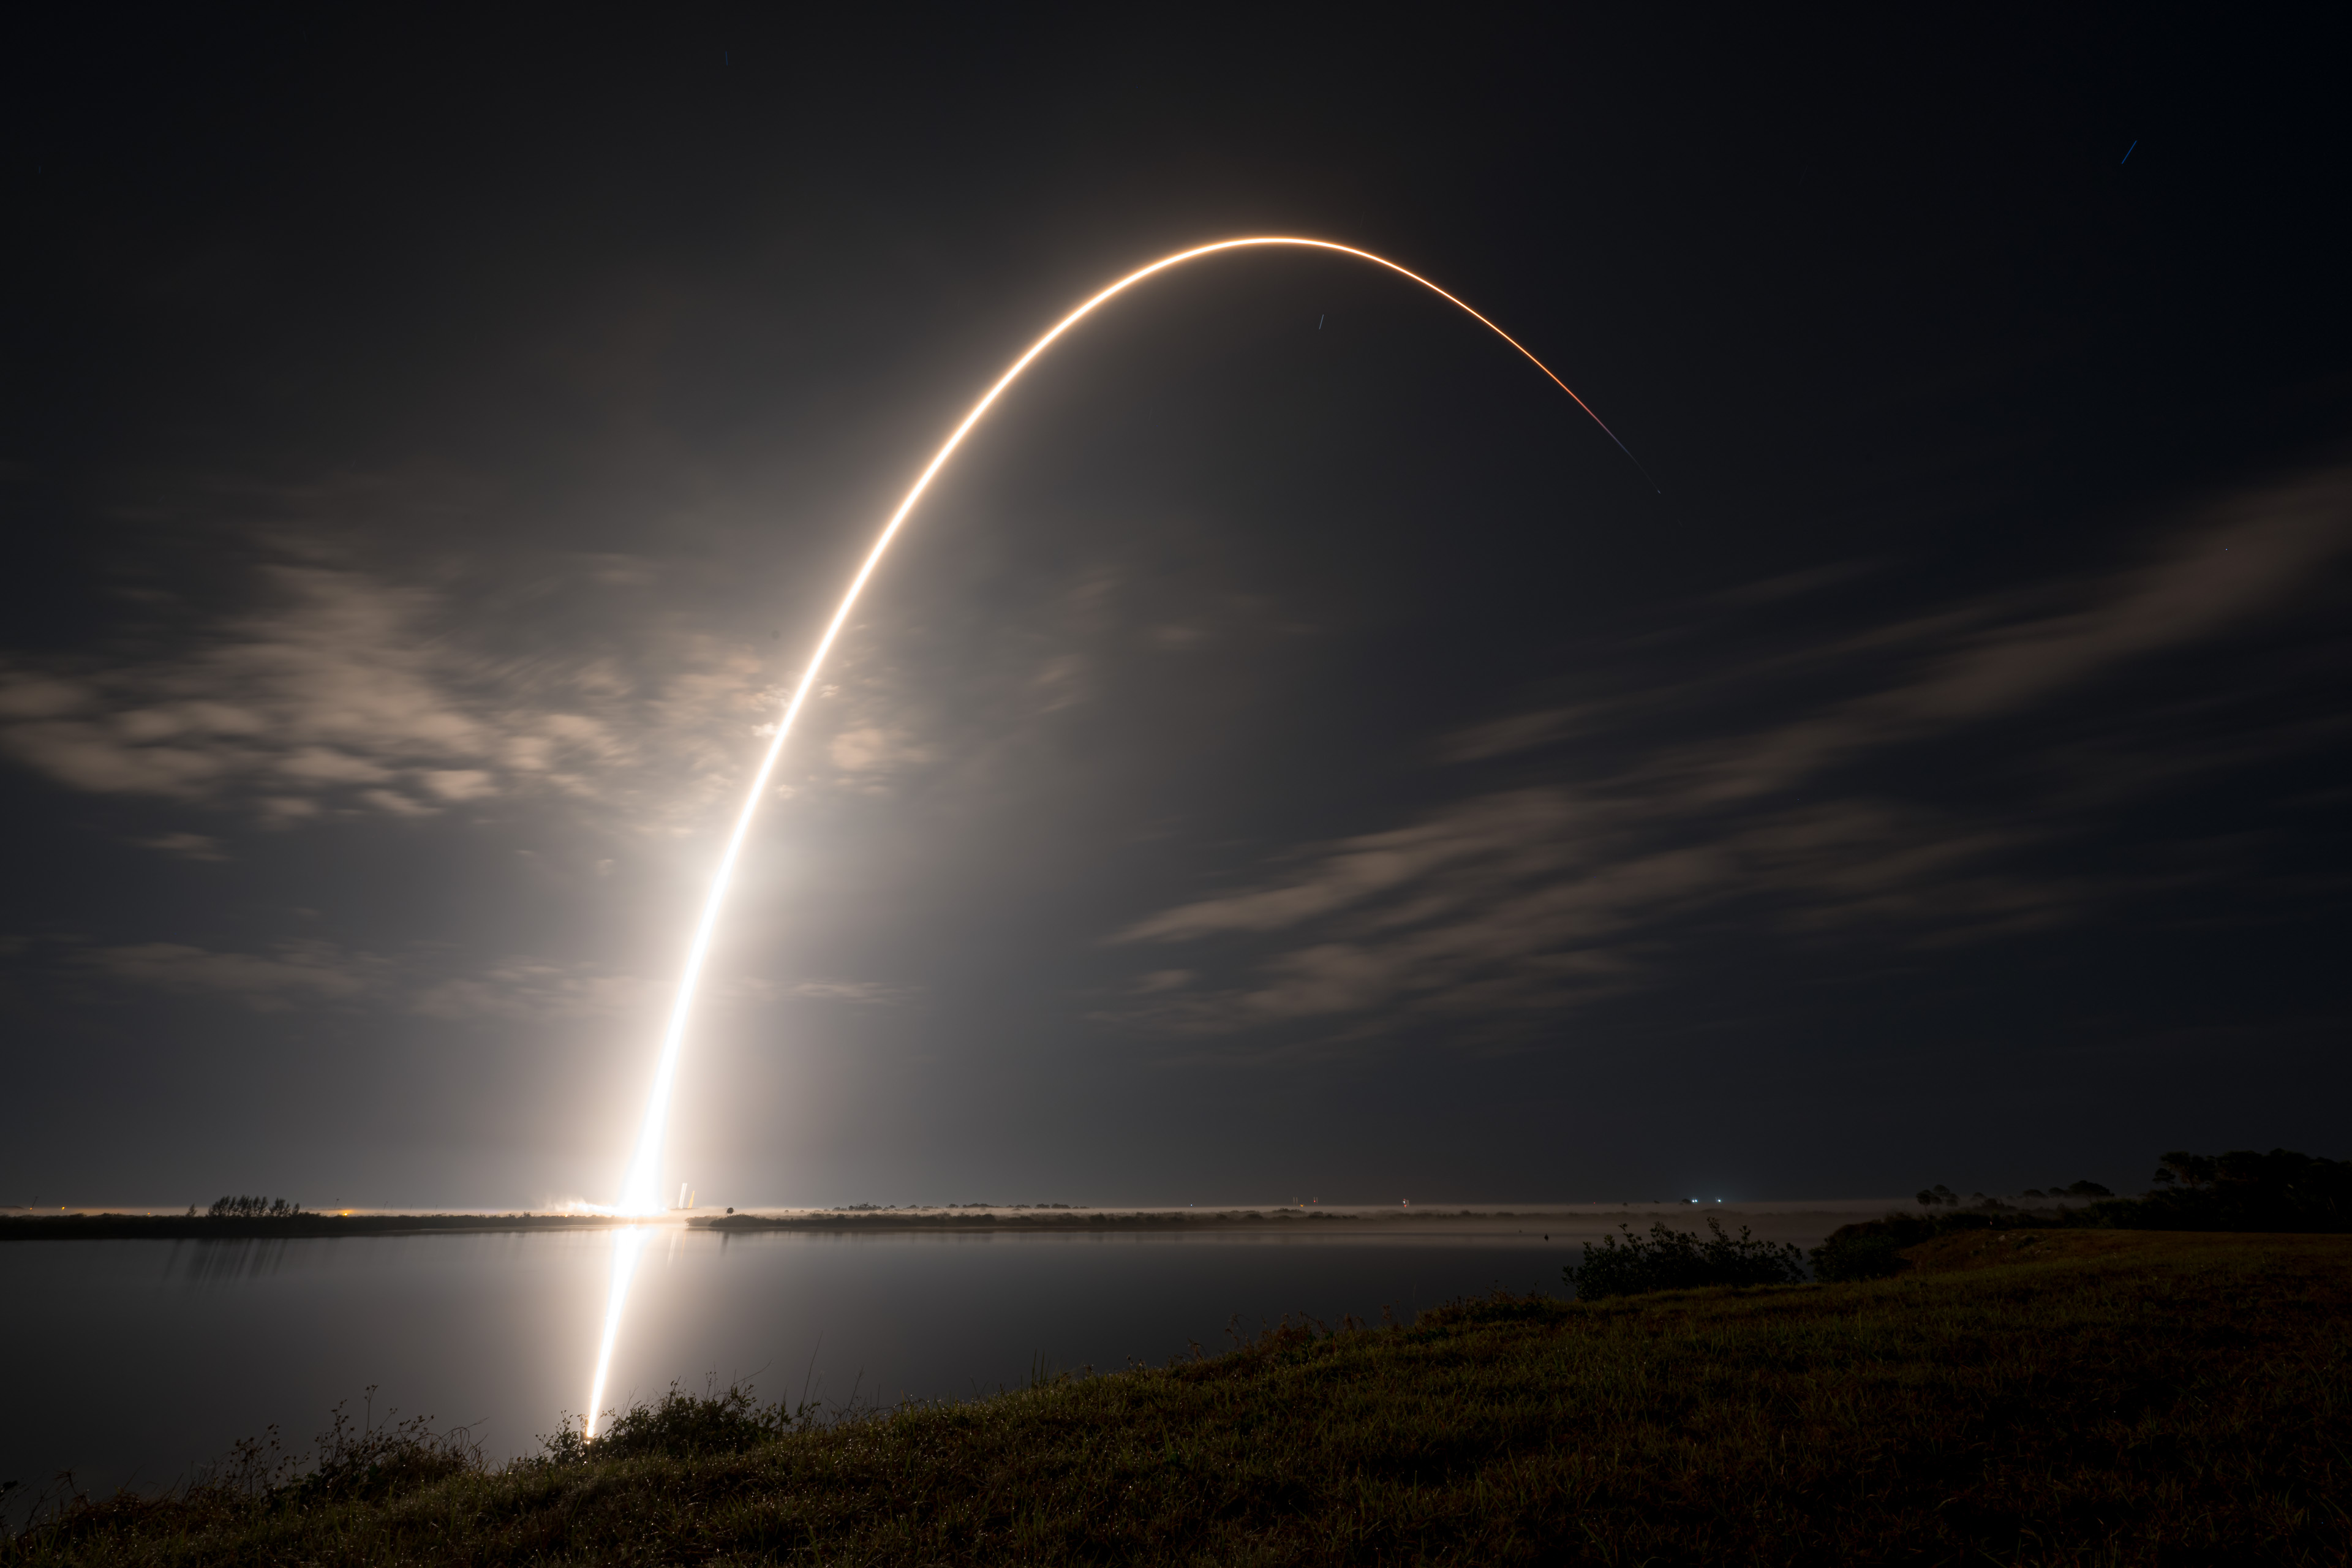 SpaceX makes its 200th successful launch of a Falcon 9 rocket